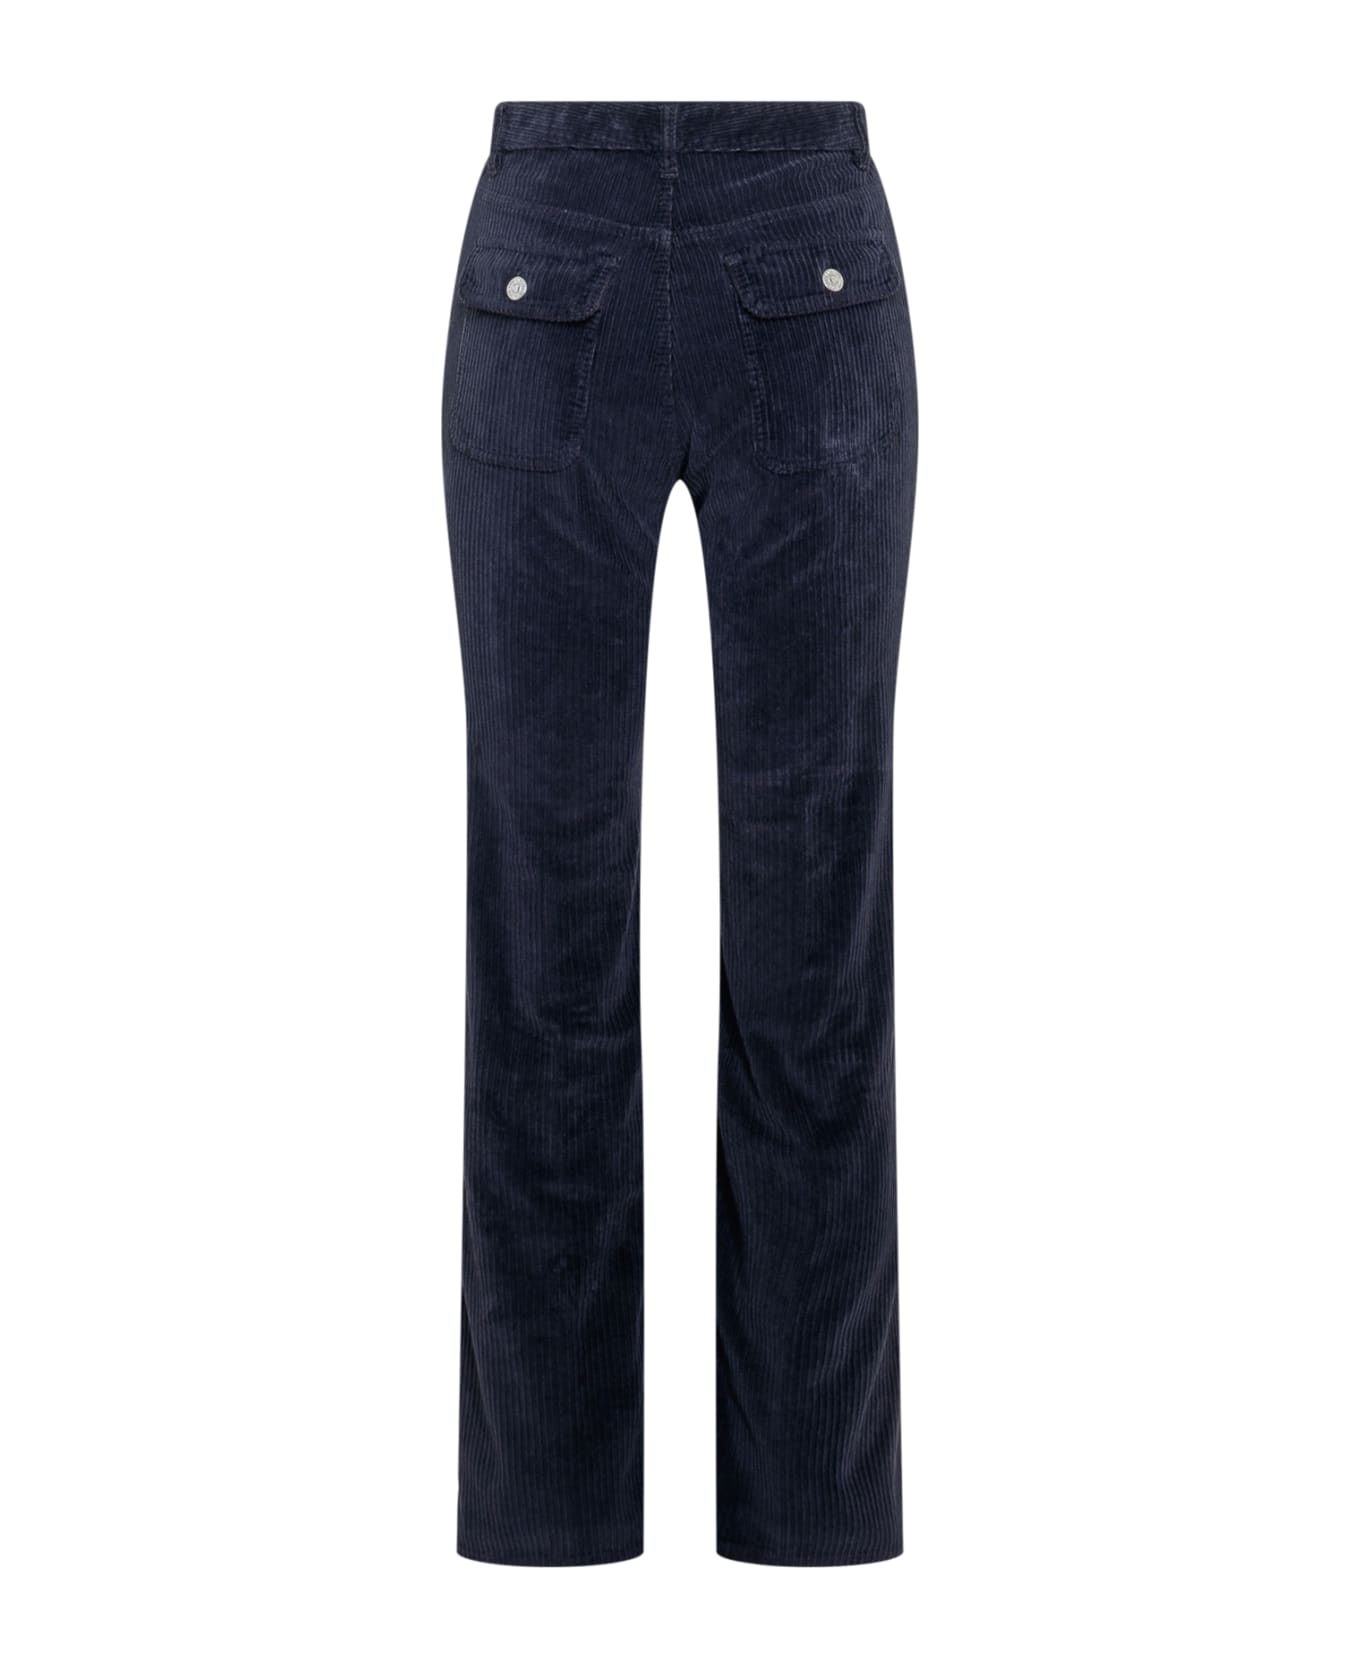 Dsquared2 Multi-pockets Trousers - NAVY BLUE